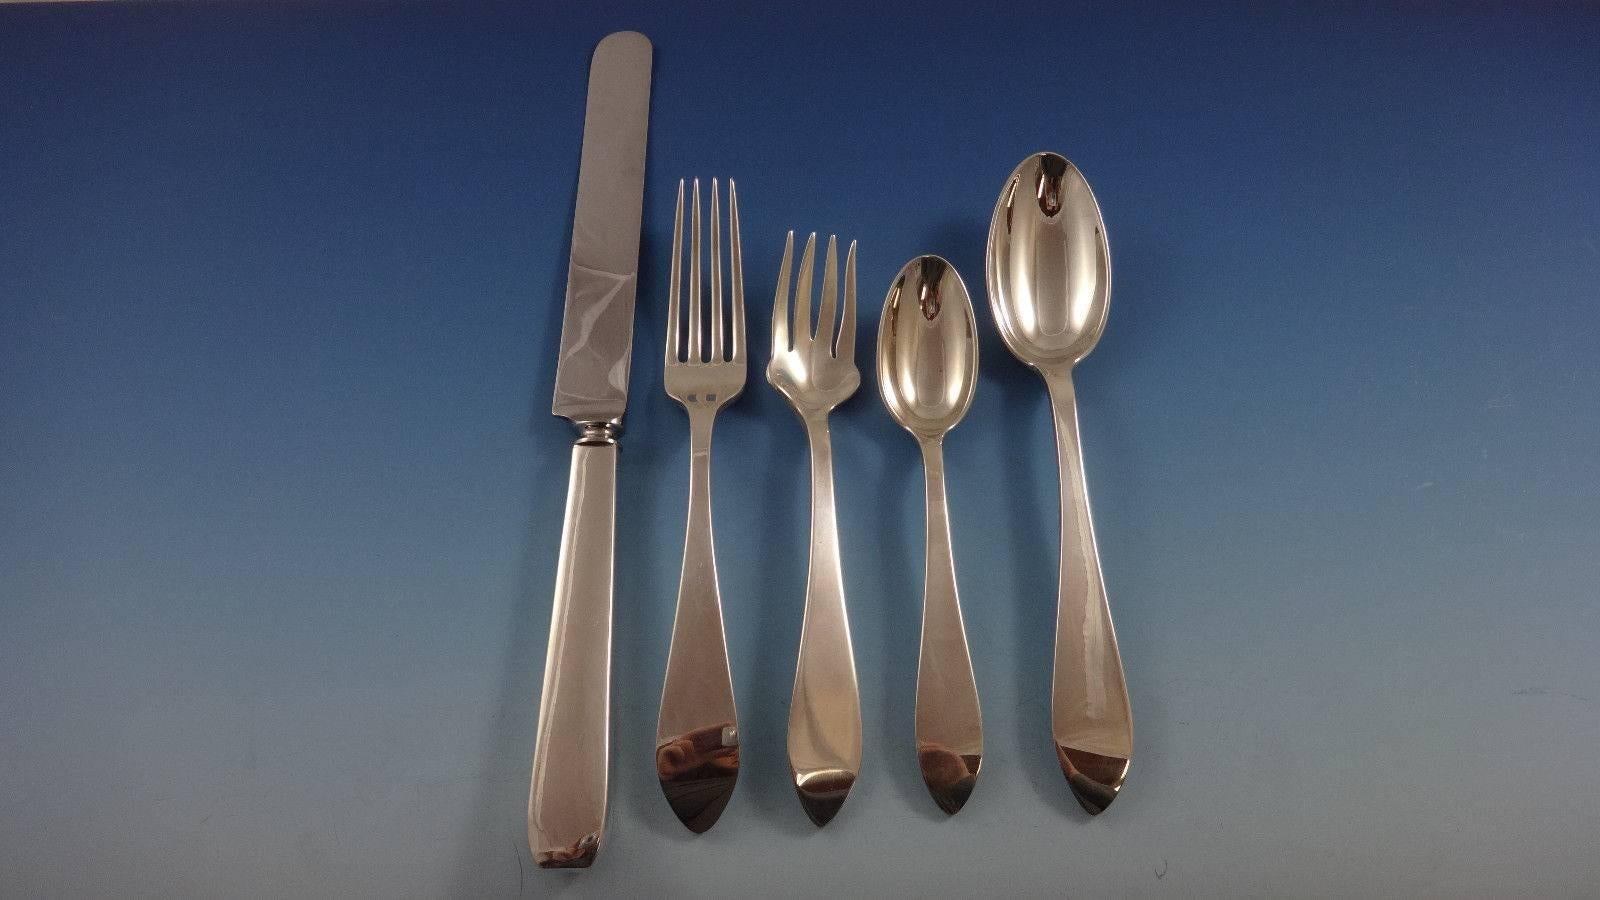 Queen Anne by Tiffany & Co. sterling silver flatware set, 42 pieces. This set includes:

Eight dinner size knives, 10 3/8